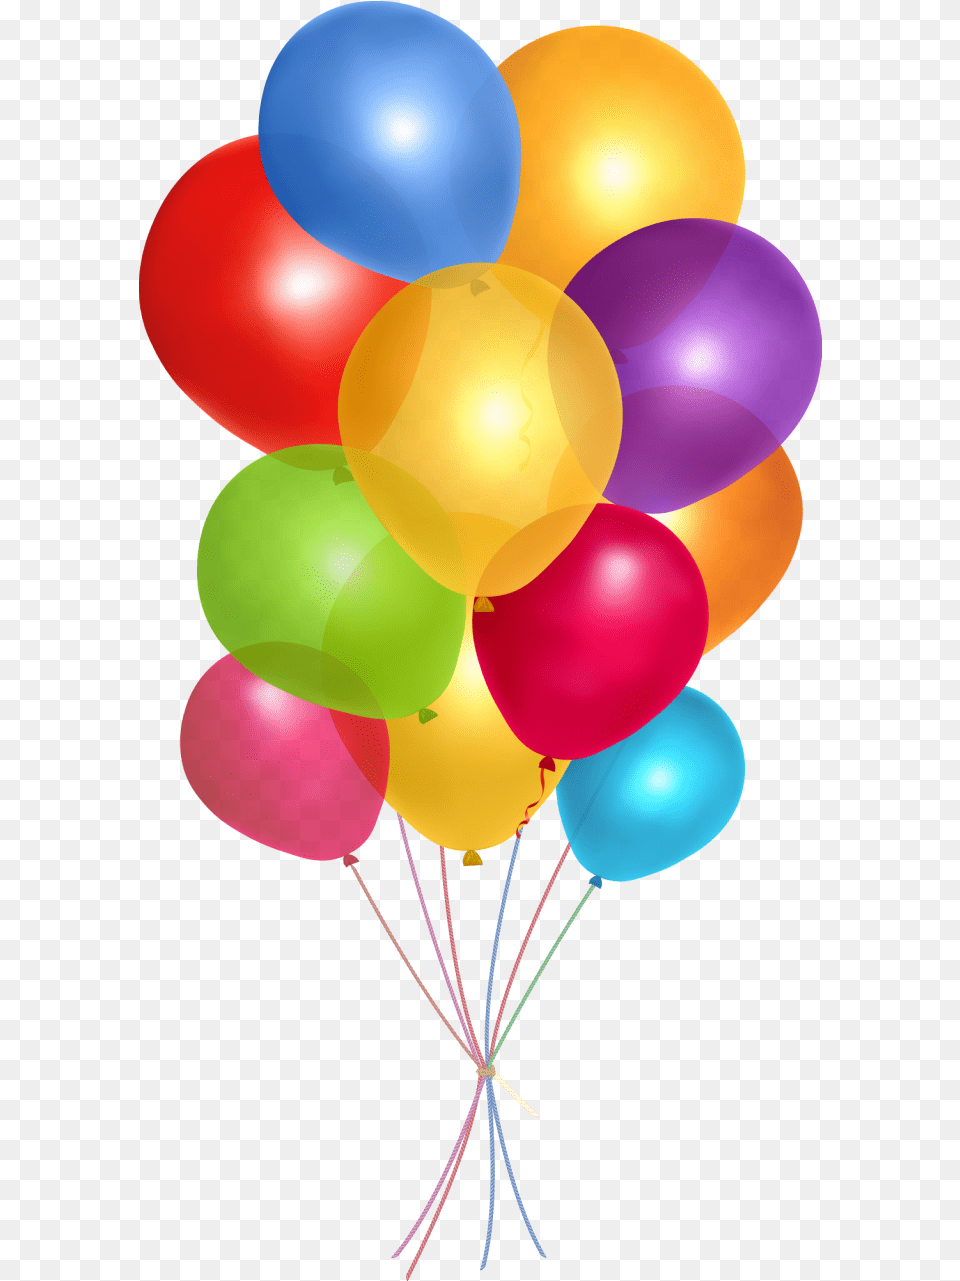 Black And White Stock Clipart Birthday Balloons Background Birthday Balloon Png Image